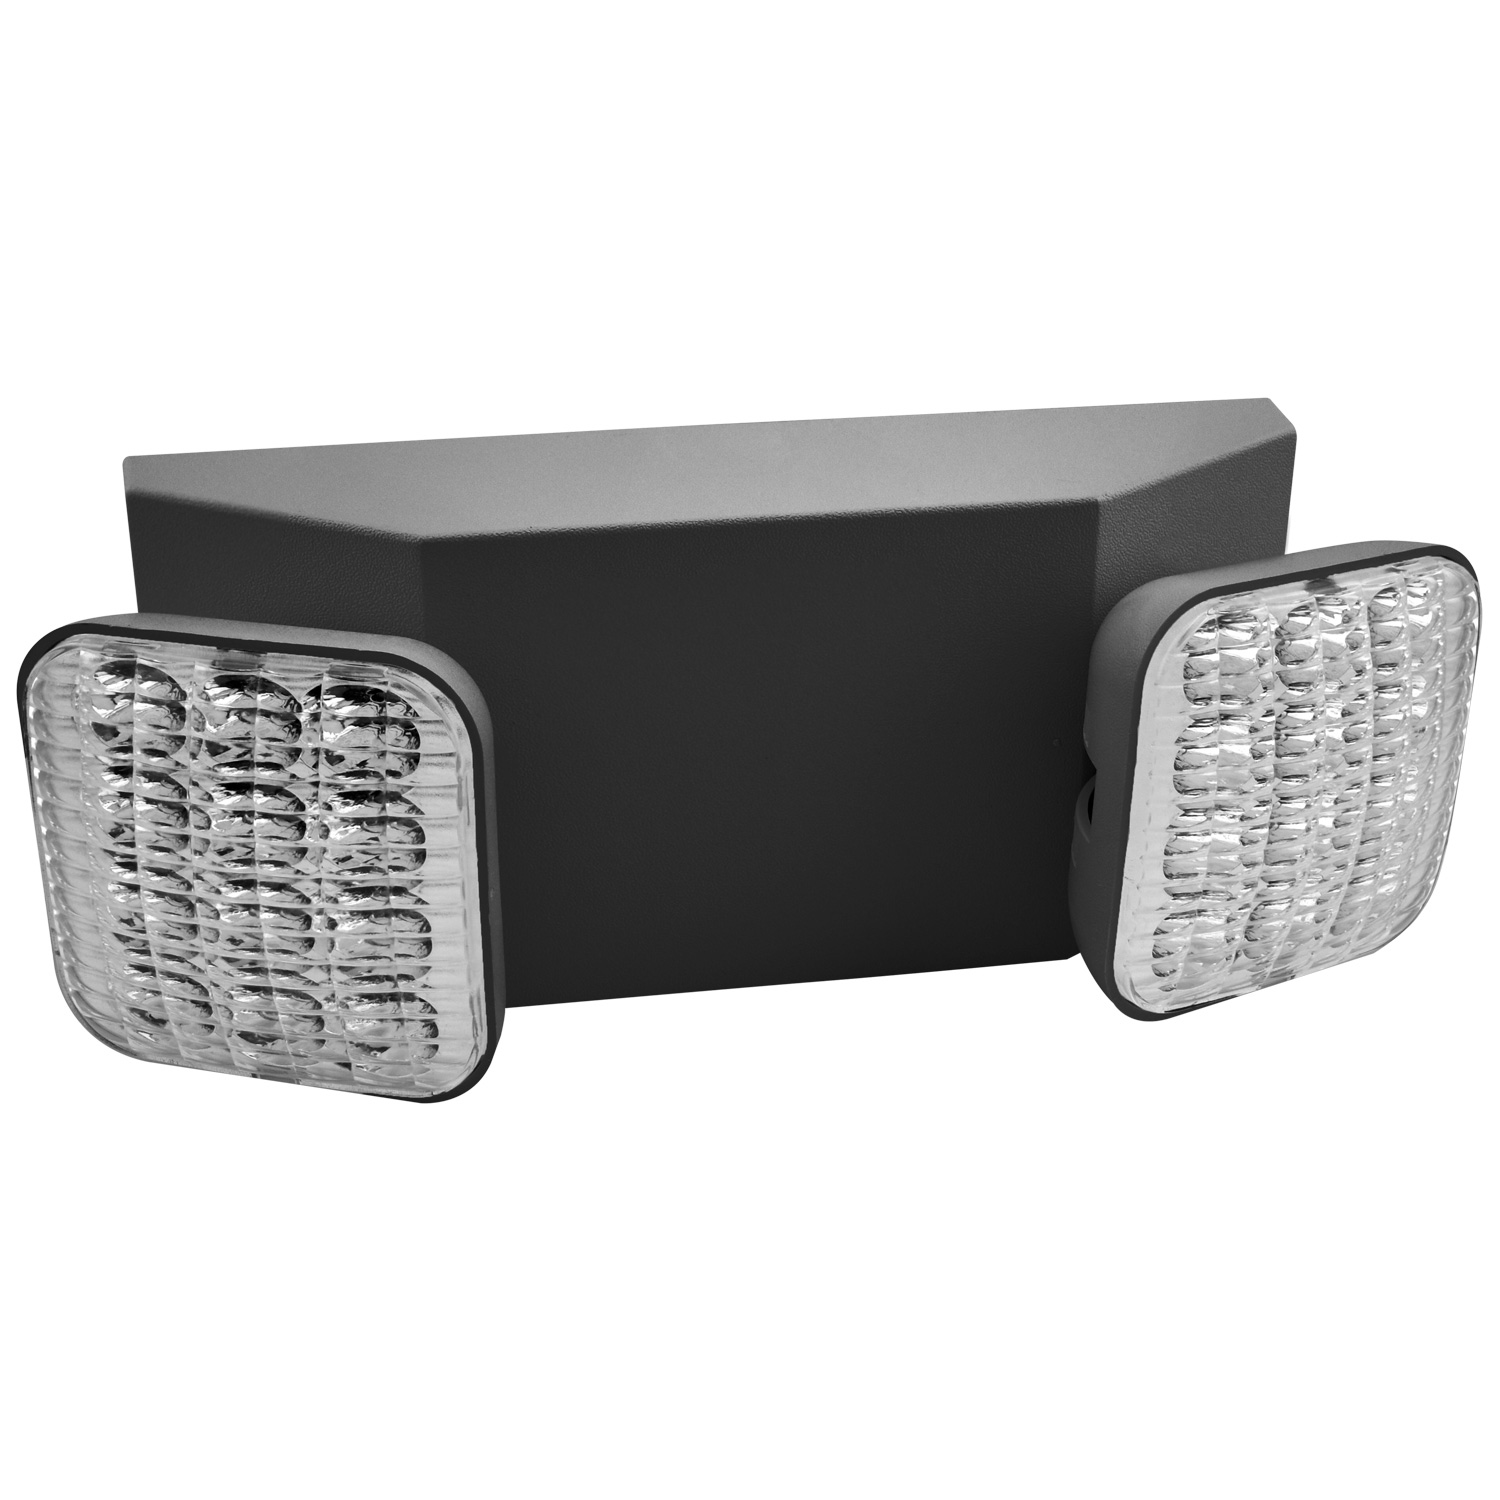 LED R5HO Two-Head Emergency Lighting with Remote Capability